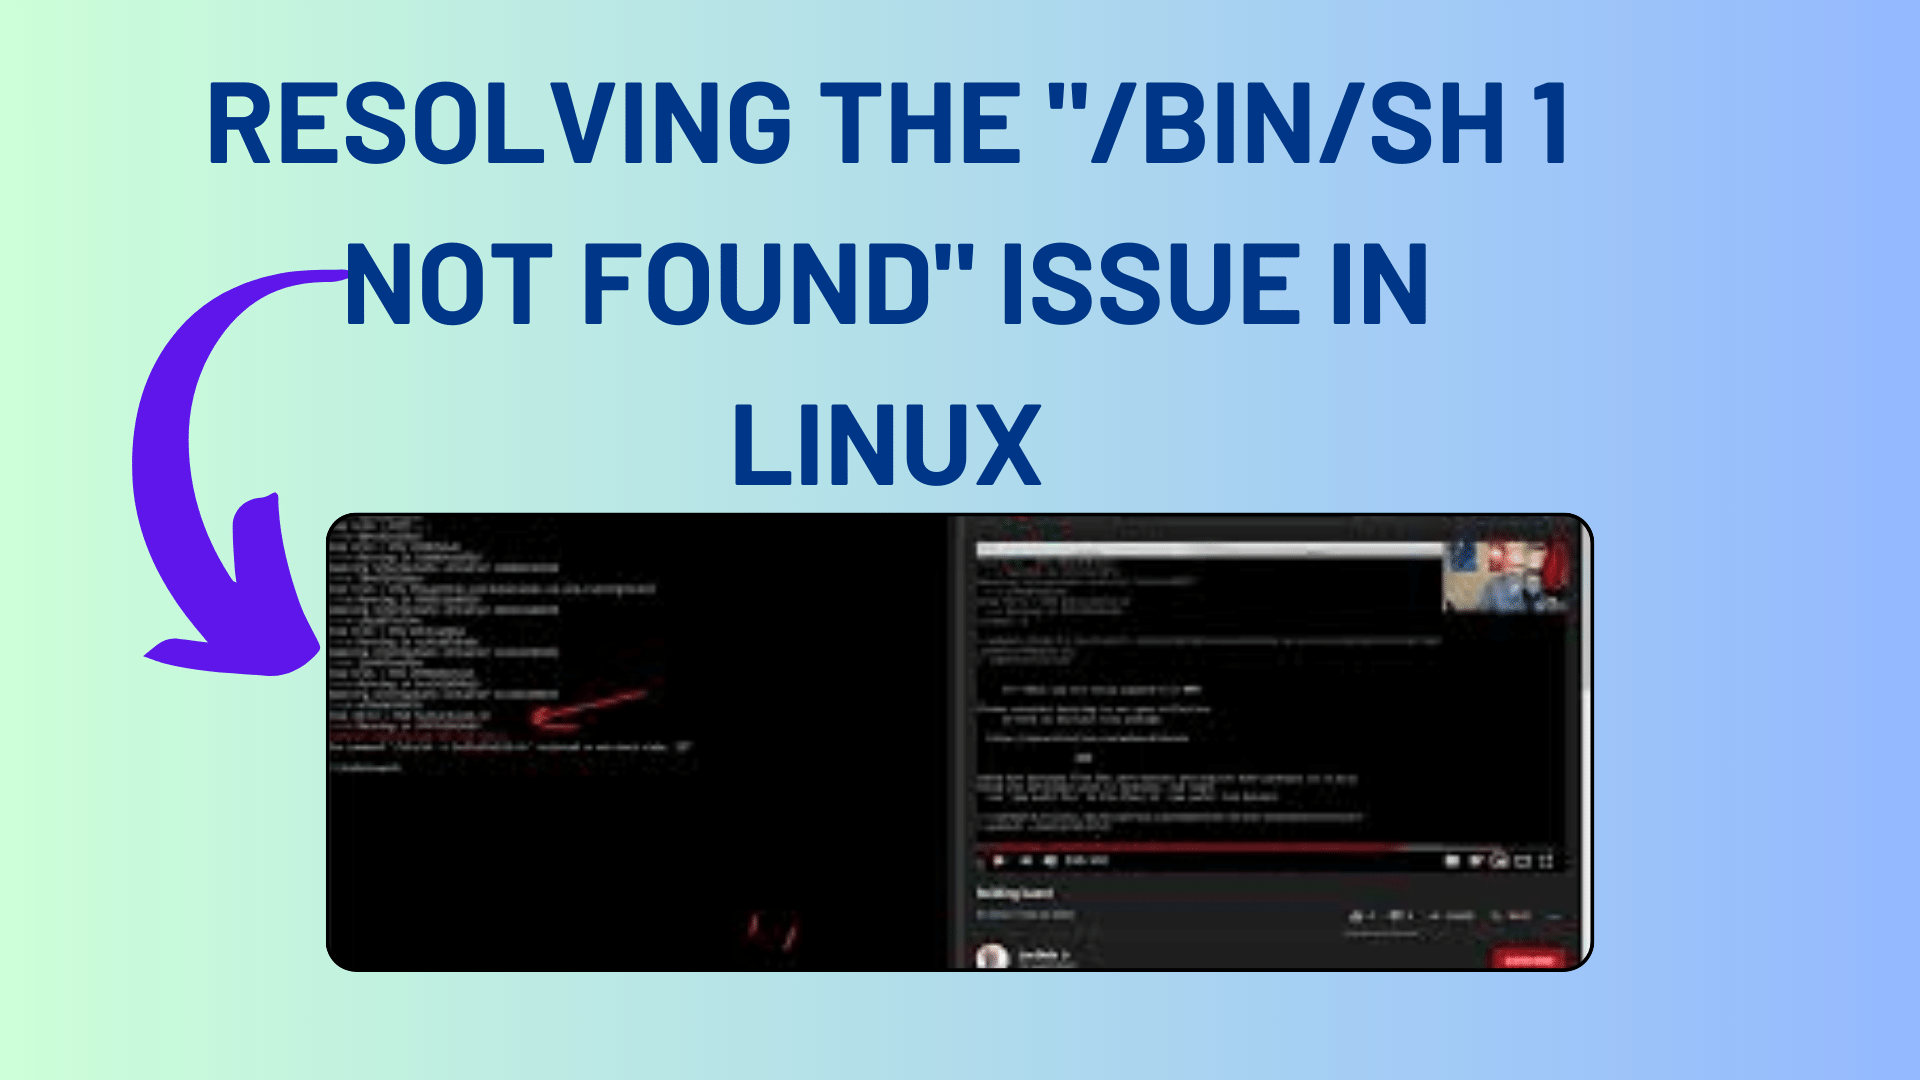 Resolving the "/bin/sh 1 not found" Issue in Linux